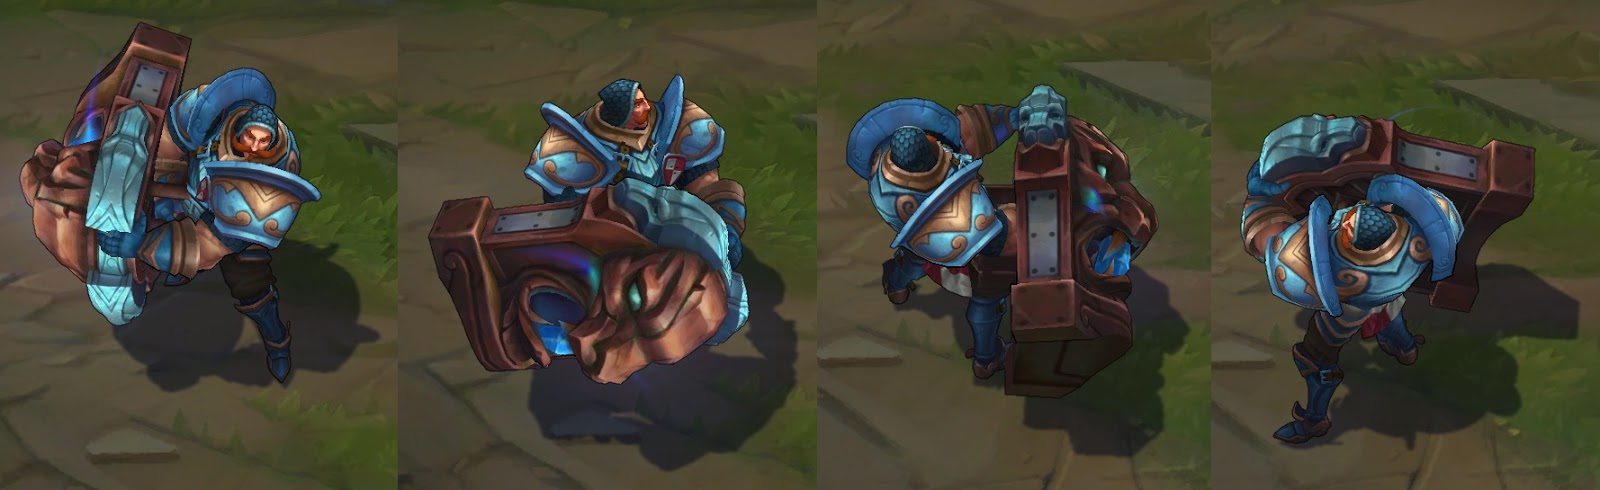 Braum Lionheart Skin for league of legends ingame picture